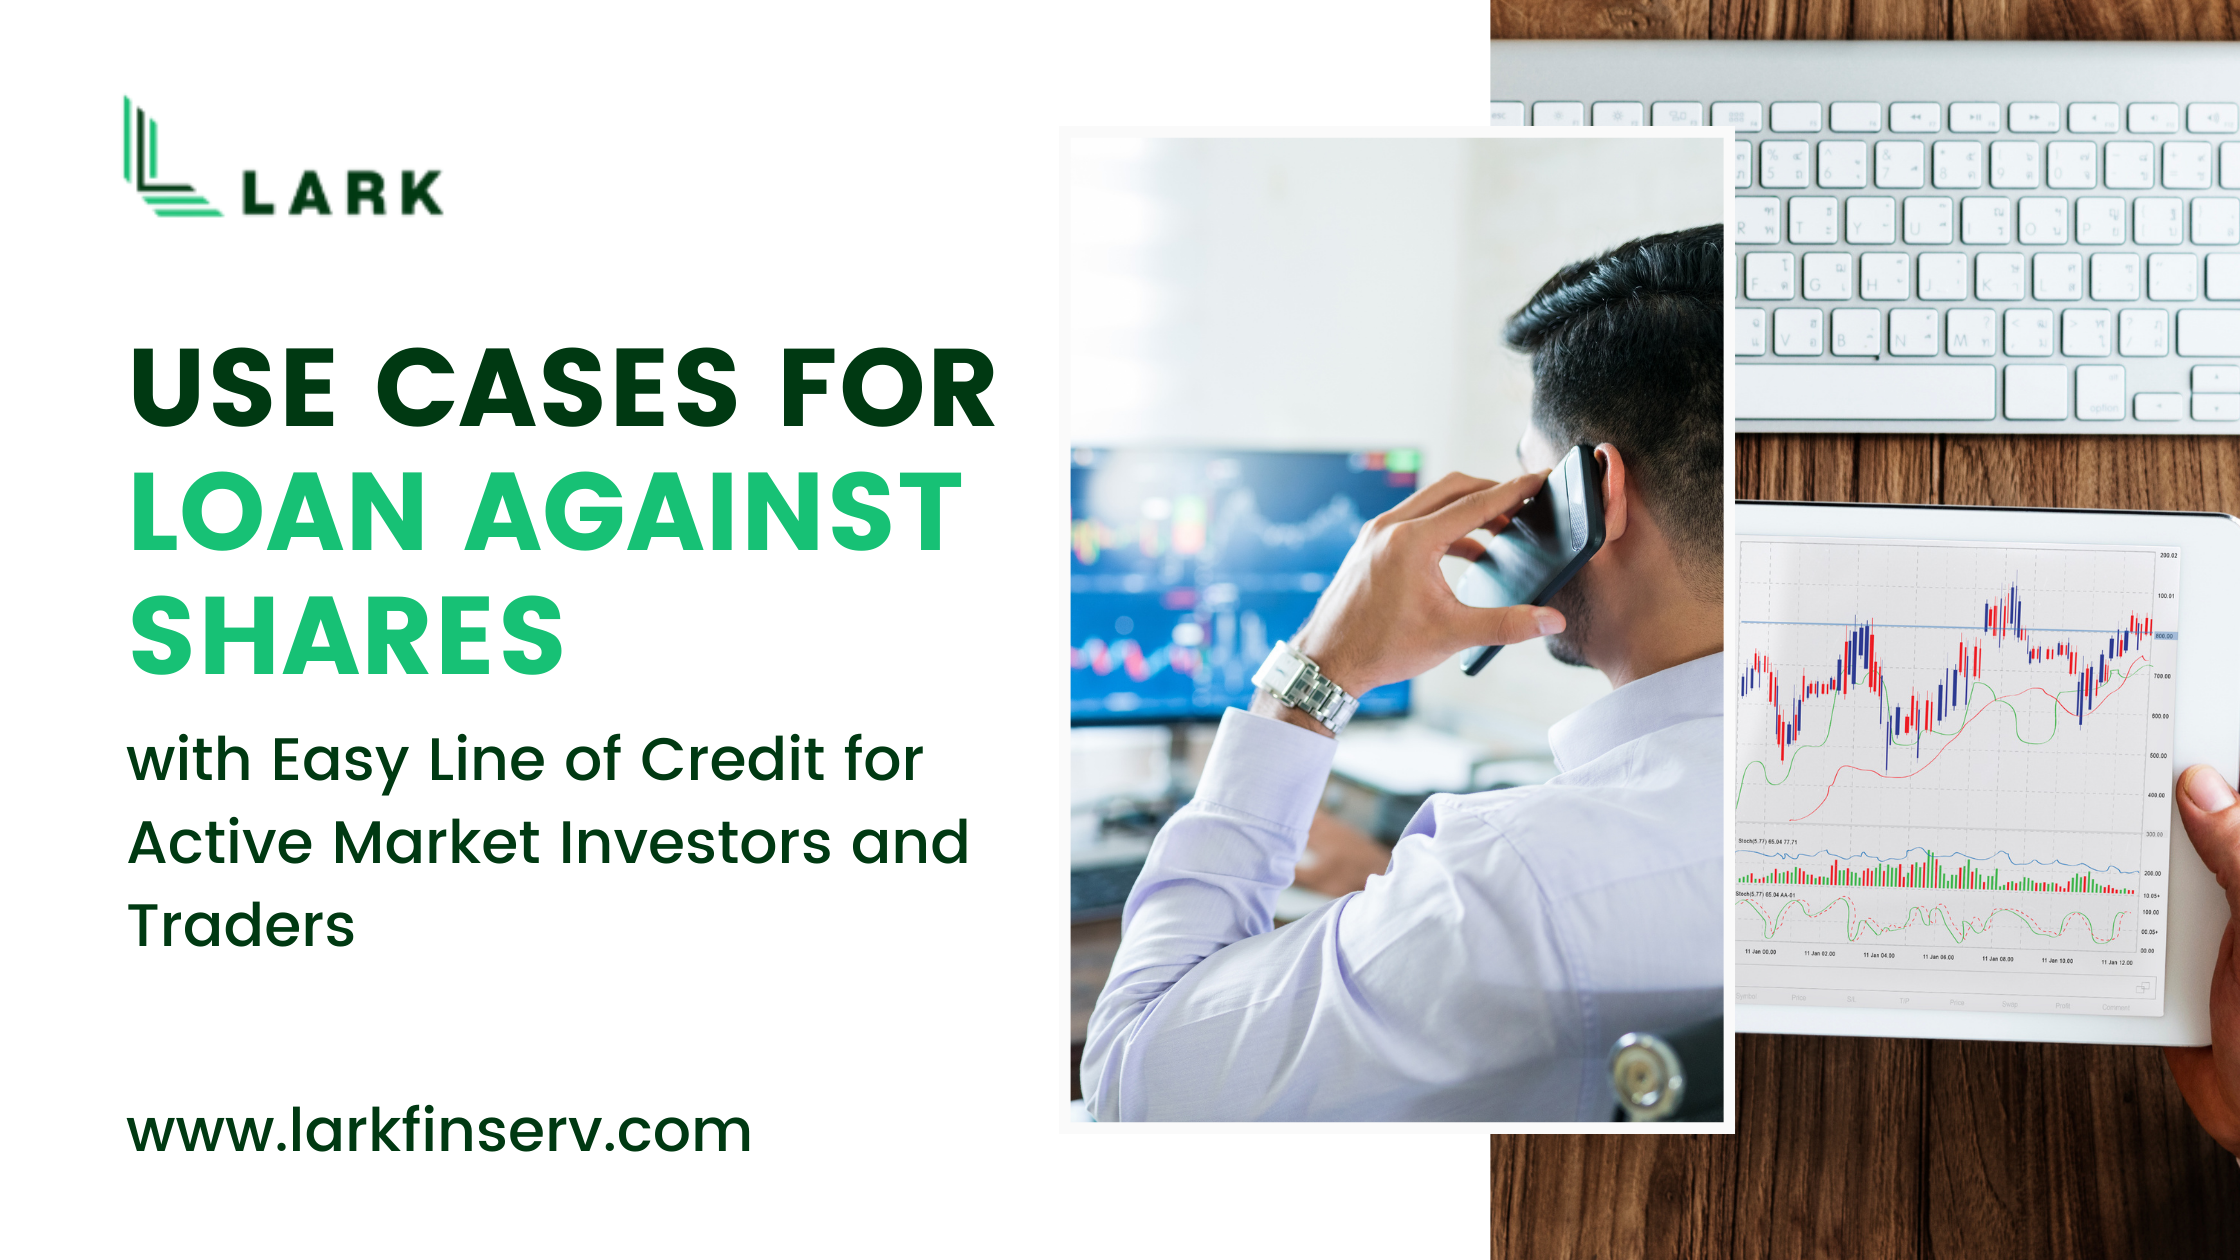 Use Cases for Loan Against Shares with Easy Line of Credit for Active Market Investors and Traders​